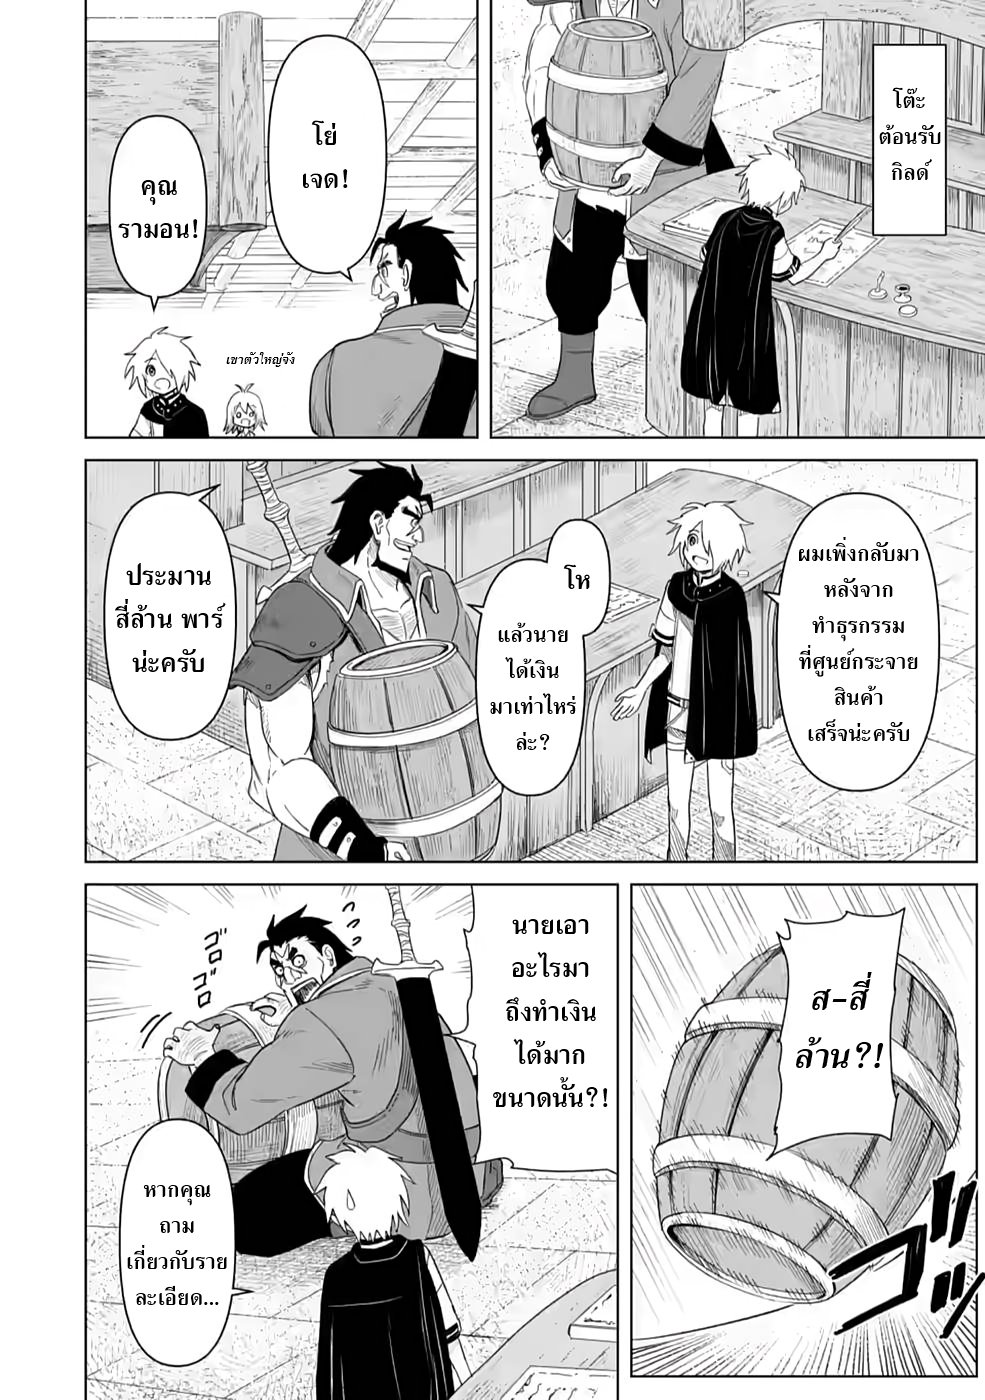 The Strongest Sage Without a Job 6 (11)